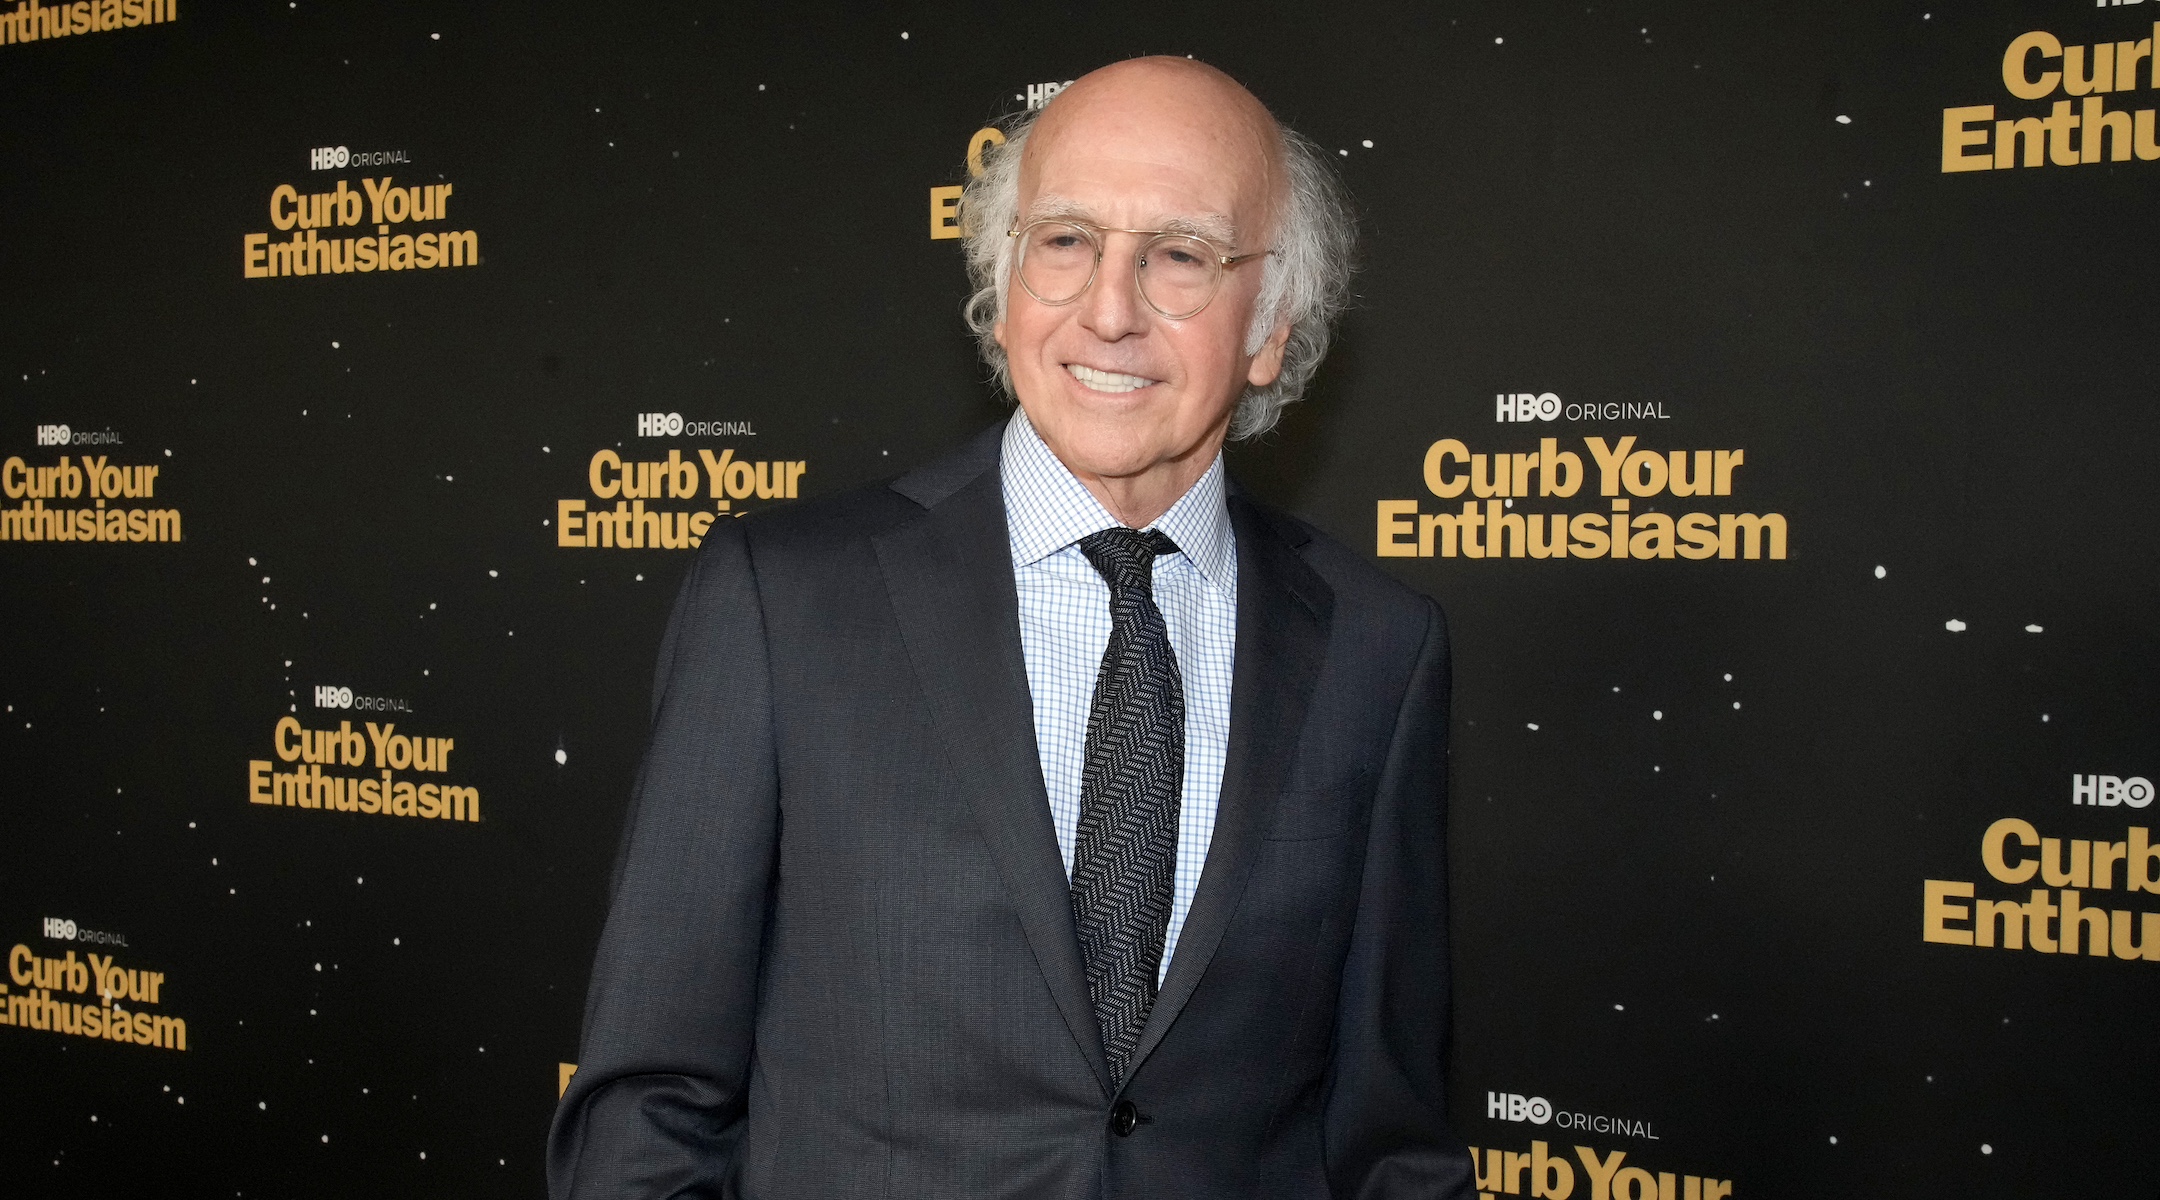 Larry David attends the “Curb Your Enthusiasm” Season 11 premiere at the Paramount Theatre in Los Angeles, Oct. 19, 2021. (Jeff Kravitz/FilmMagic for HBO)